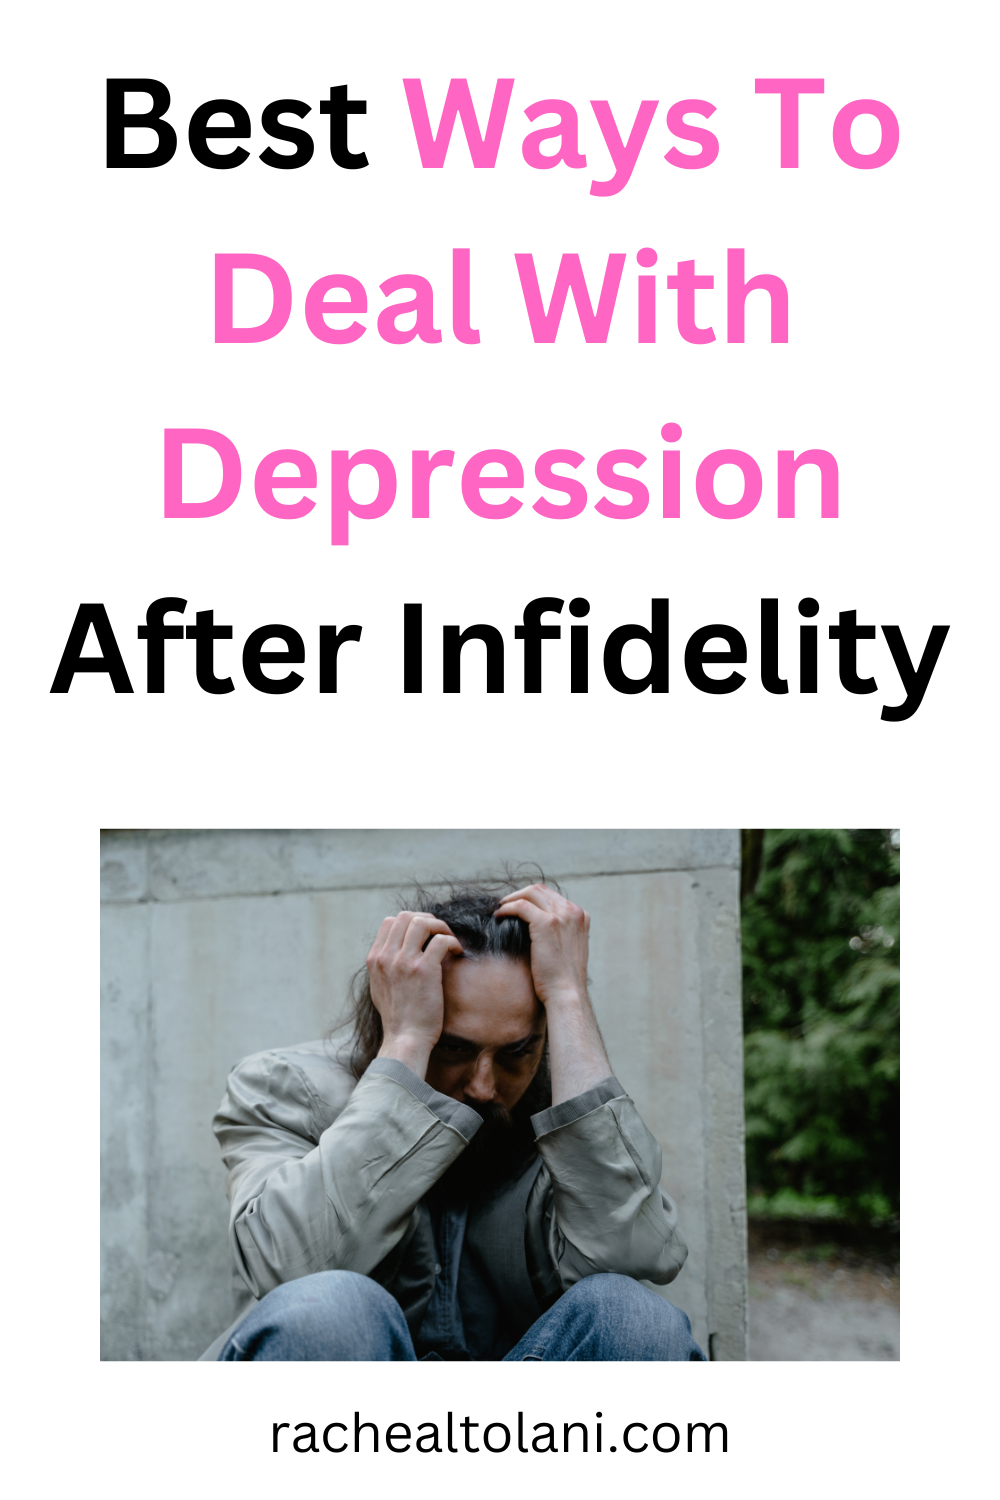 How to deal with depression after infidelity